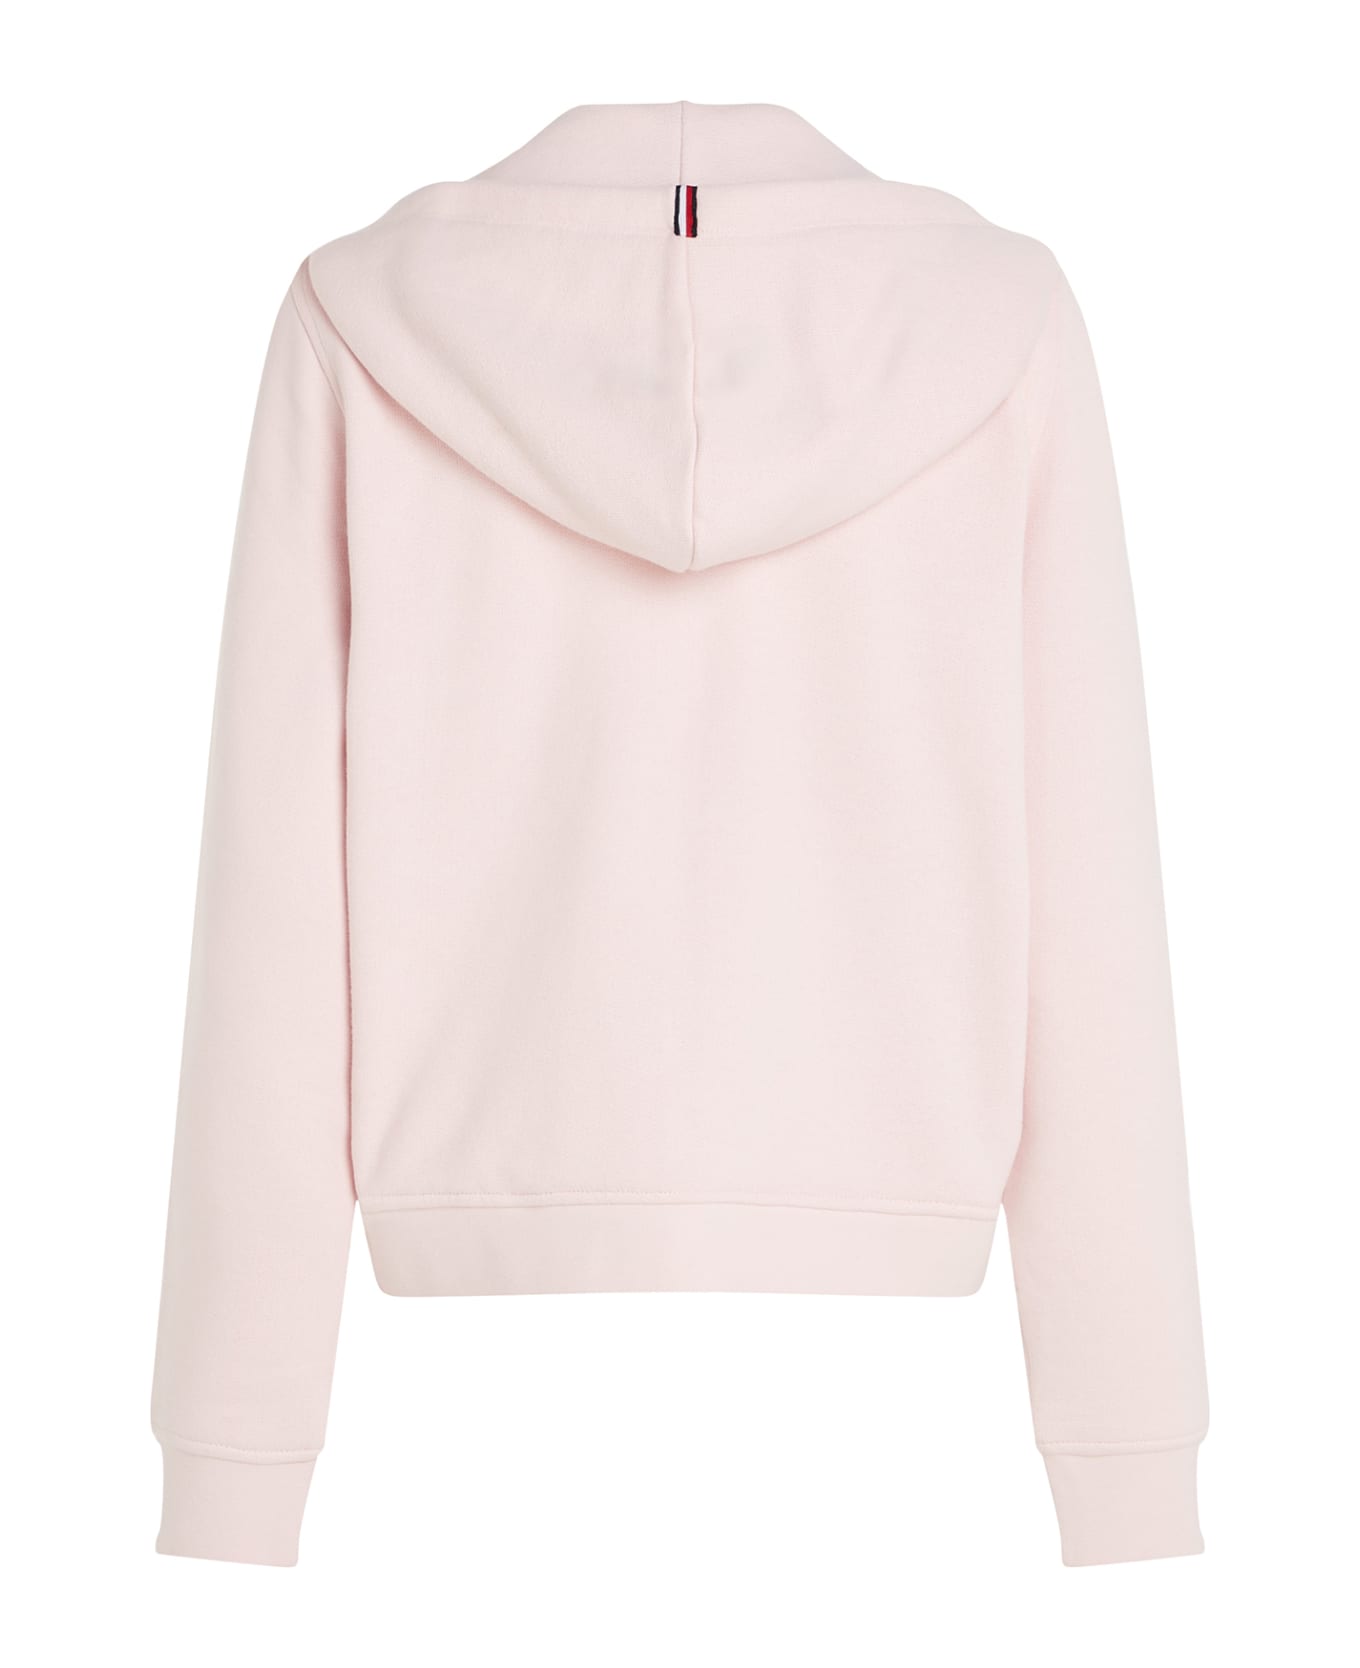 Tommy Hilfiger Pink Sweatshirt With Zip And Hood - WHIMSY PINK